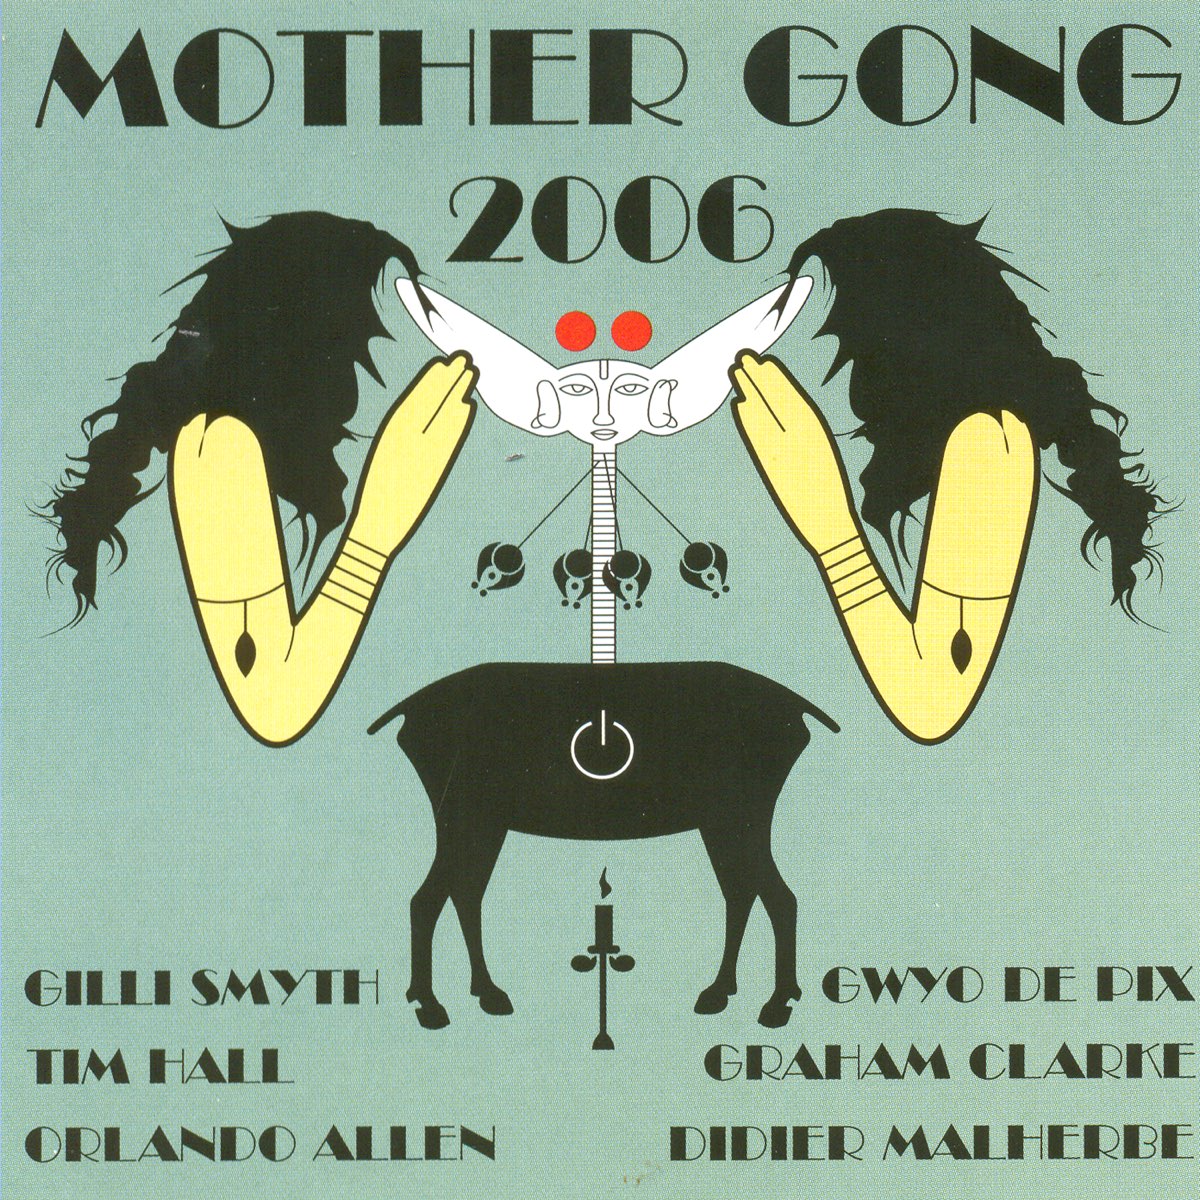 Mother Gong обложки. Gong "i see you (2lp)". Mother Gong Eye обложки. Mother Gong Fairy обложки. Альбомы 2006 года